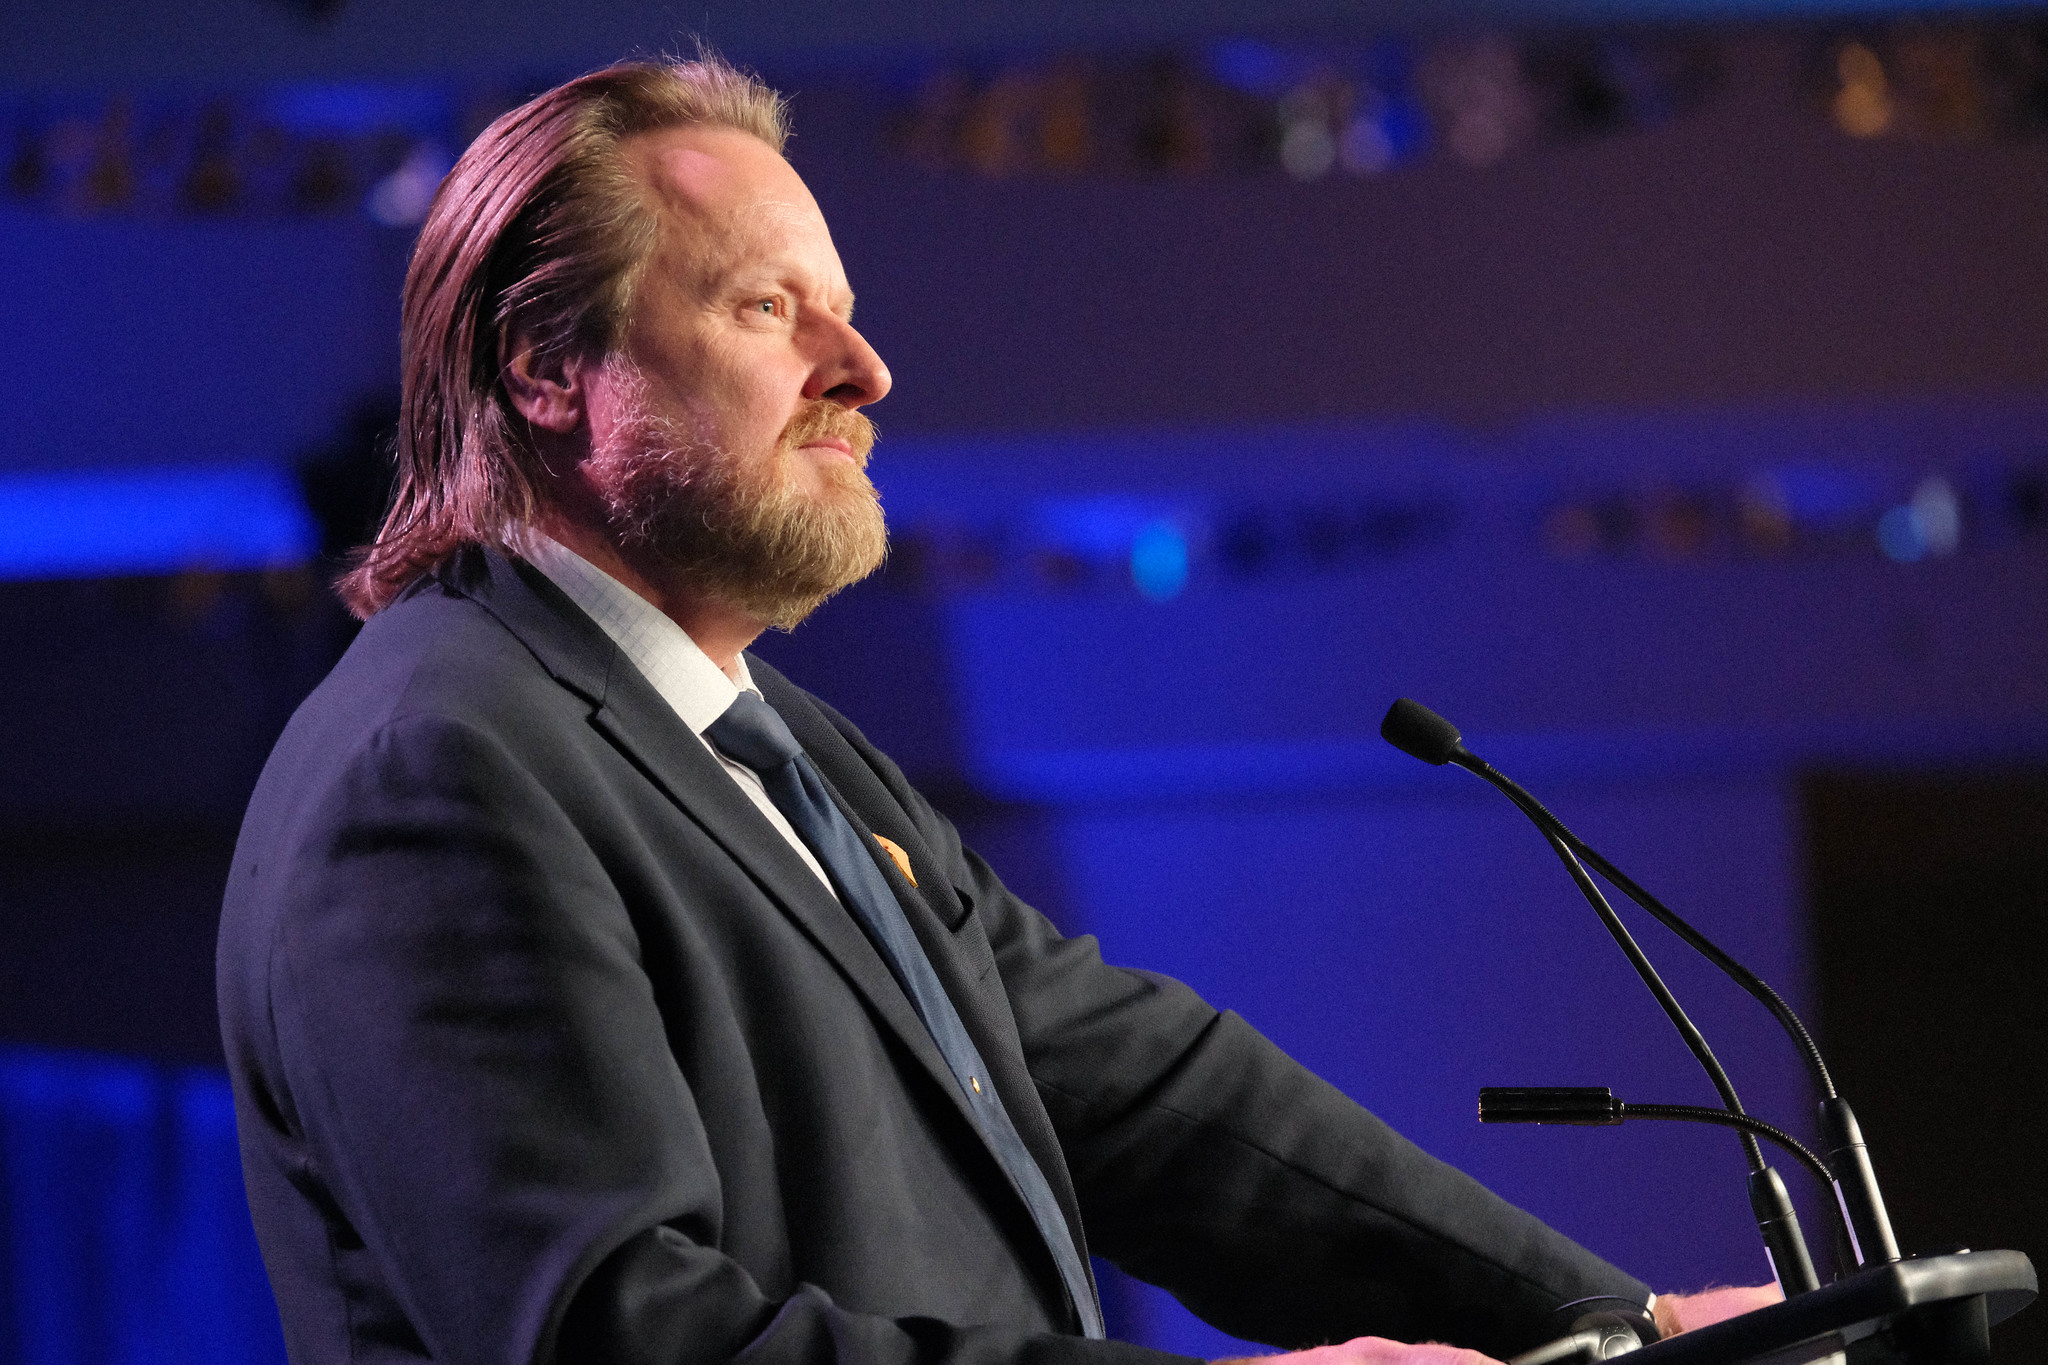 Image: profile image of a bearded man in a suit and tie standing at a podium with microphones looking out into an audience outside the frame. There is a wash of royal blue lighting in the background.